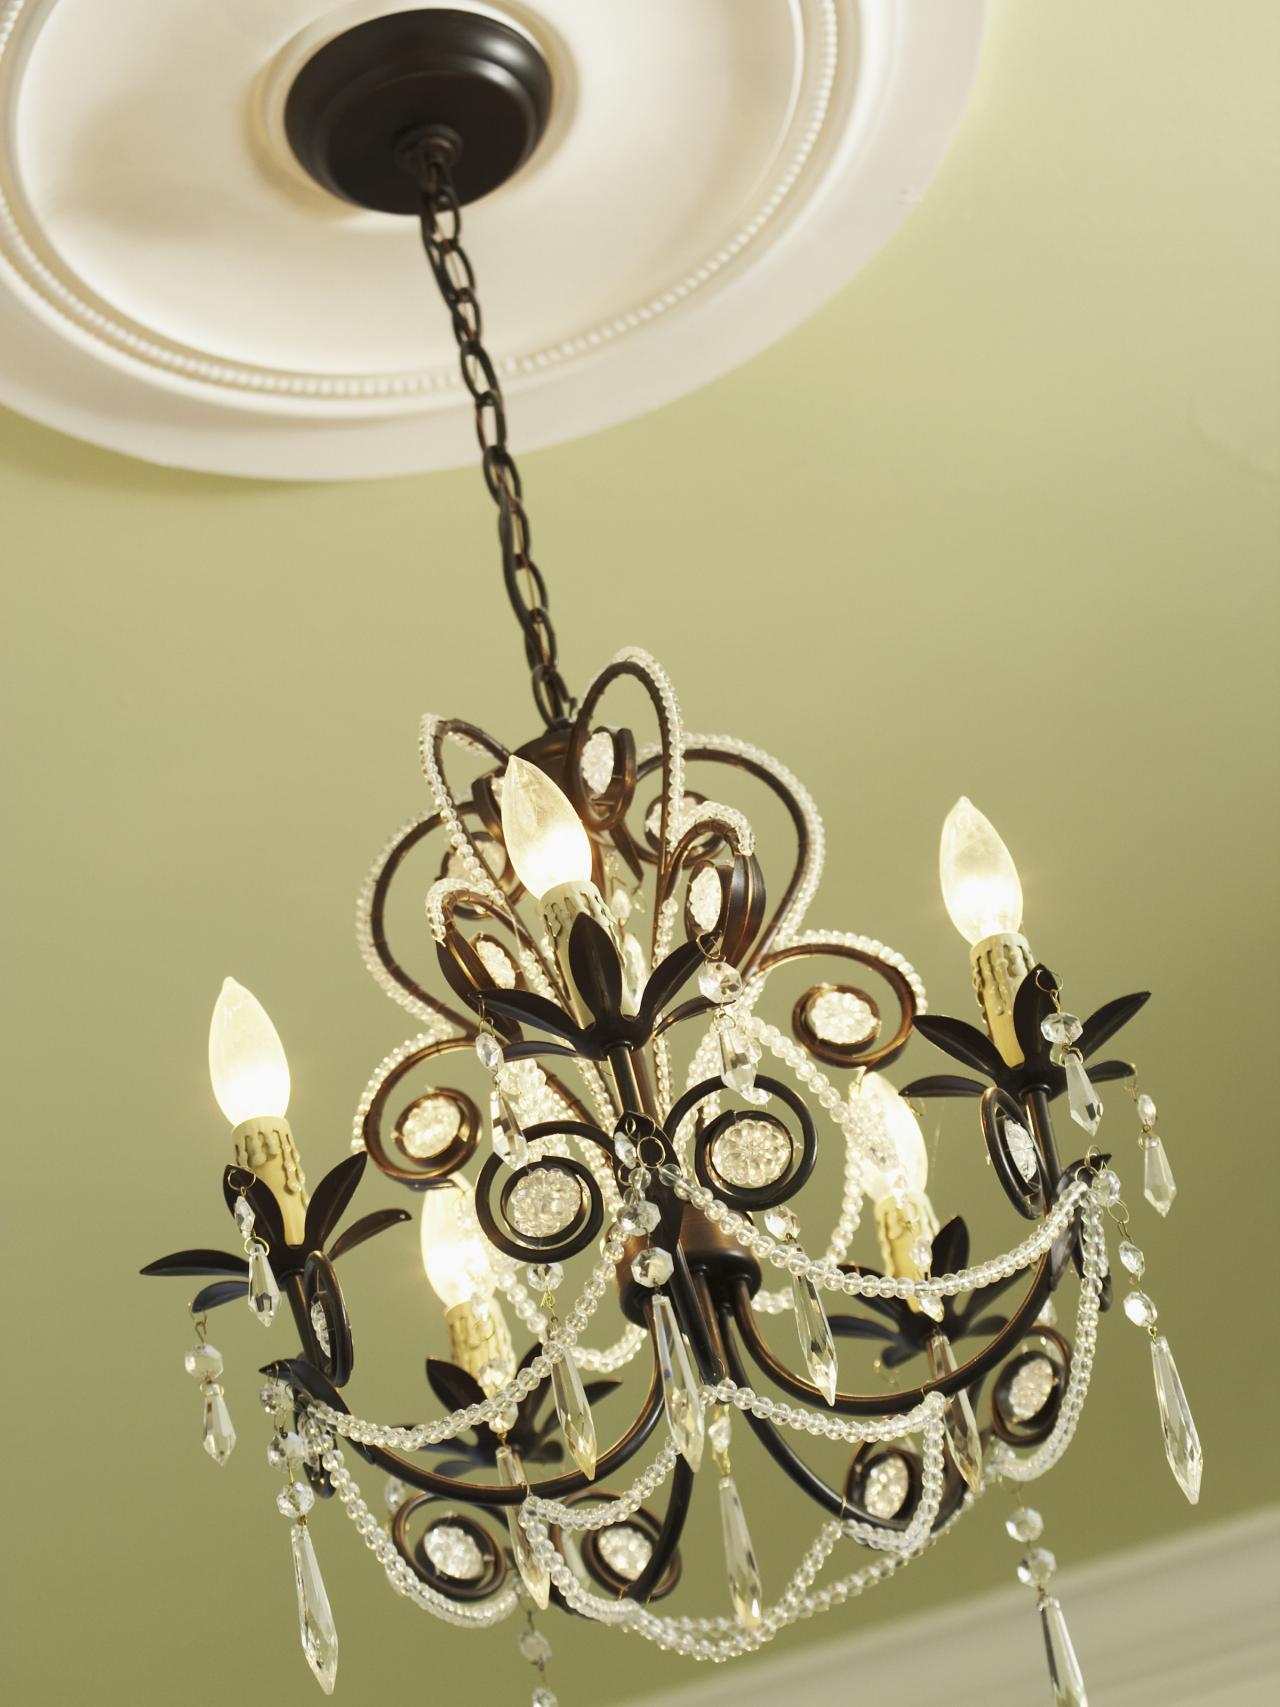 Decorative Ceiling Medallion, How To Add Chandelier Ceiling Fan